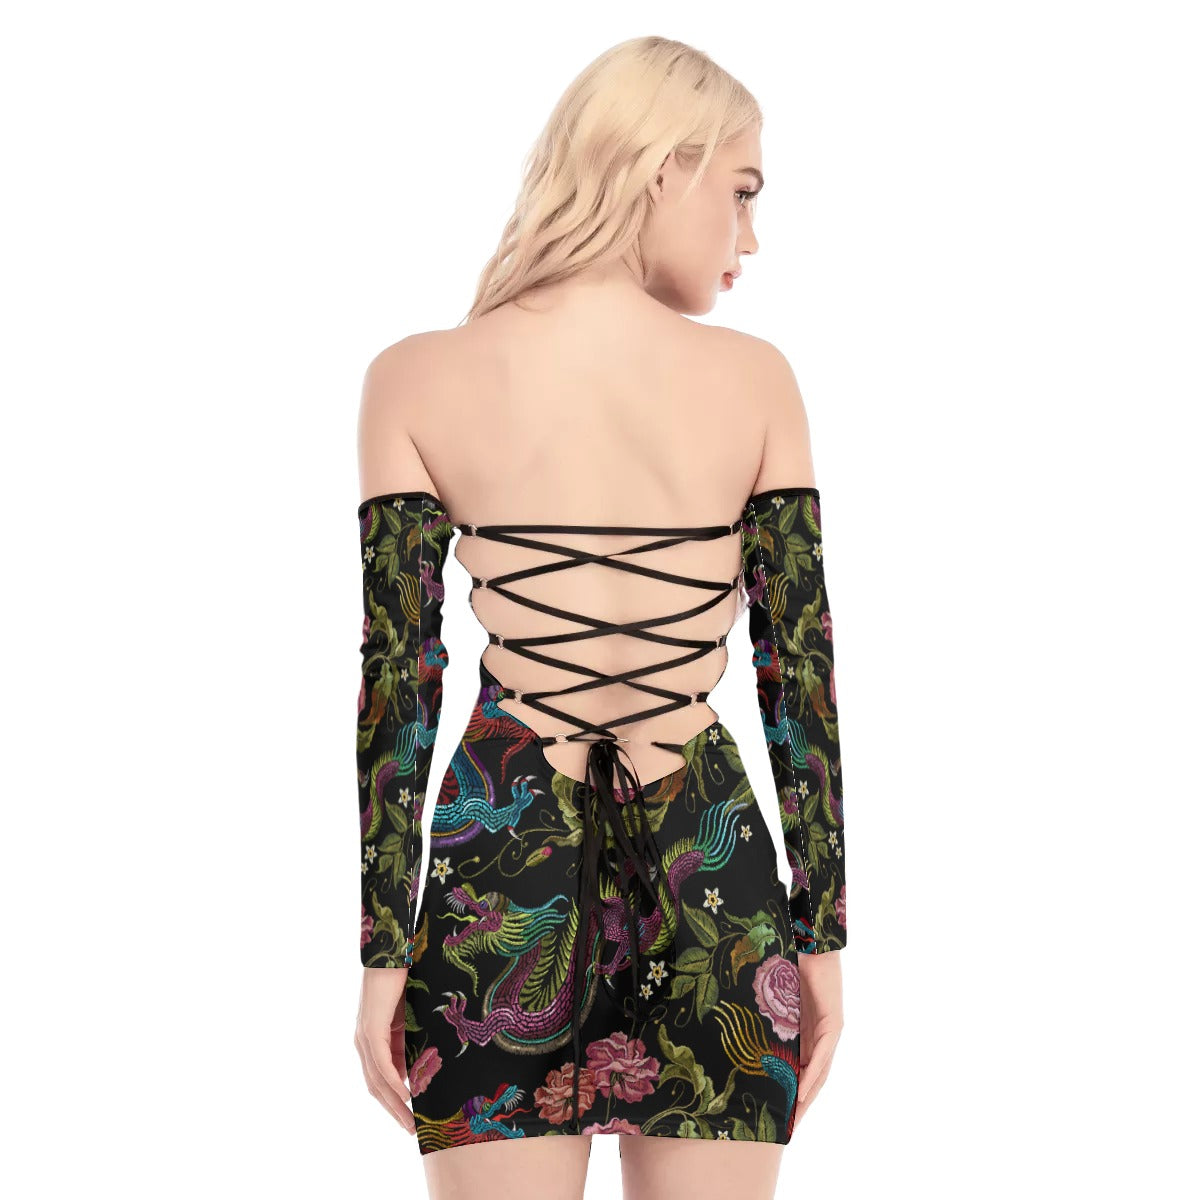 Dragons & Flowers Lace-up Dress